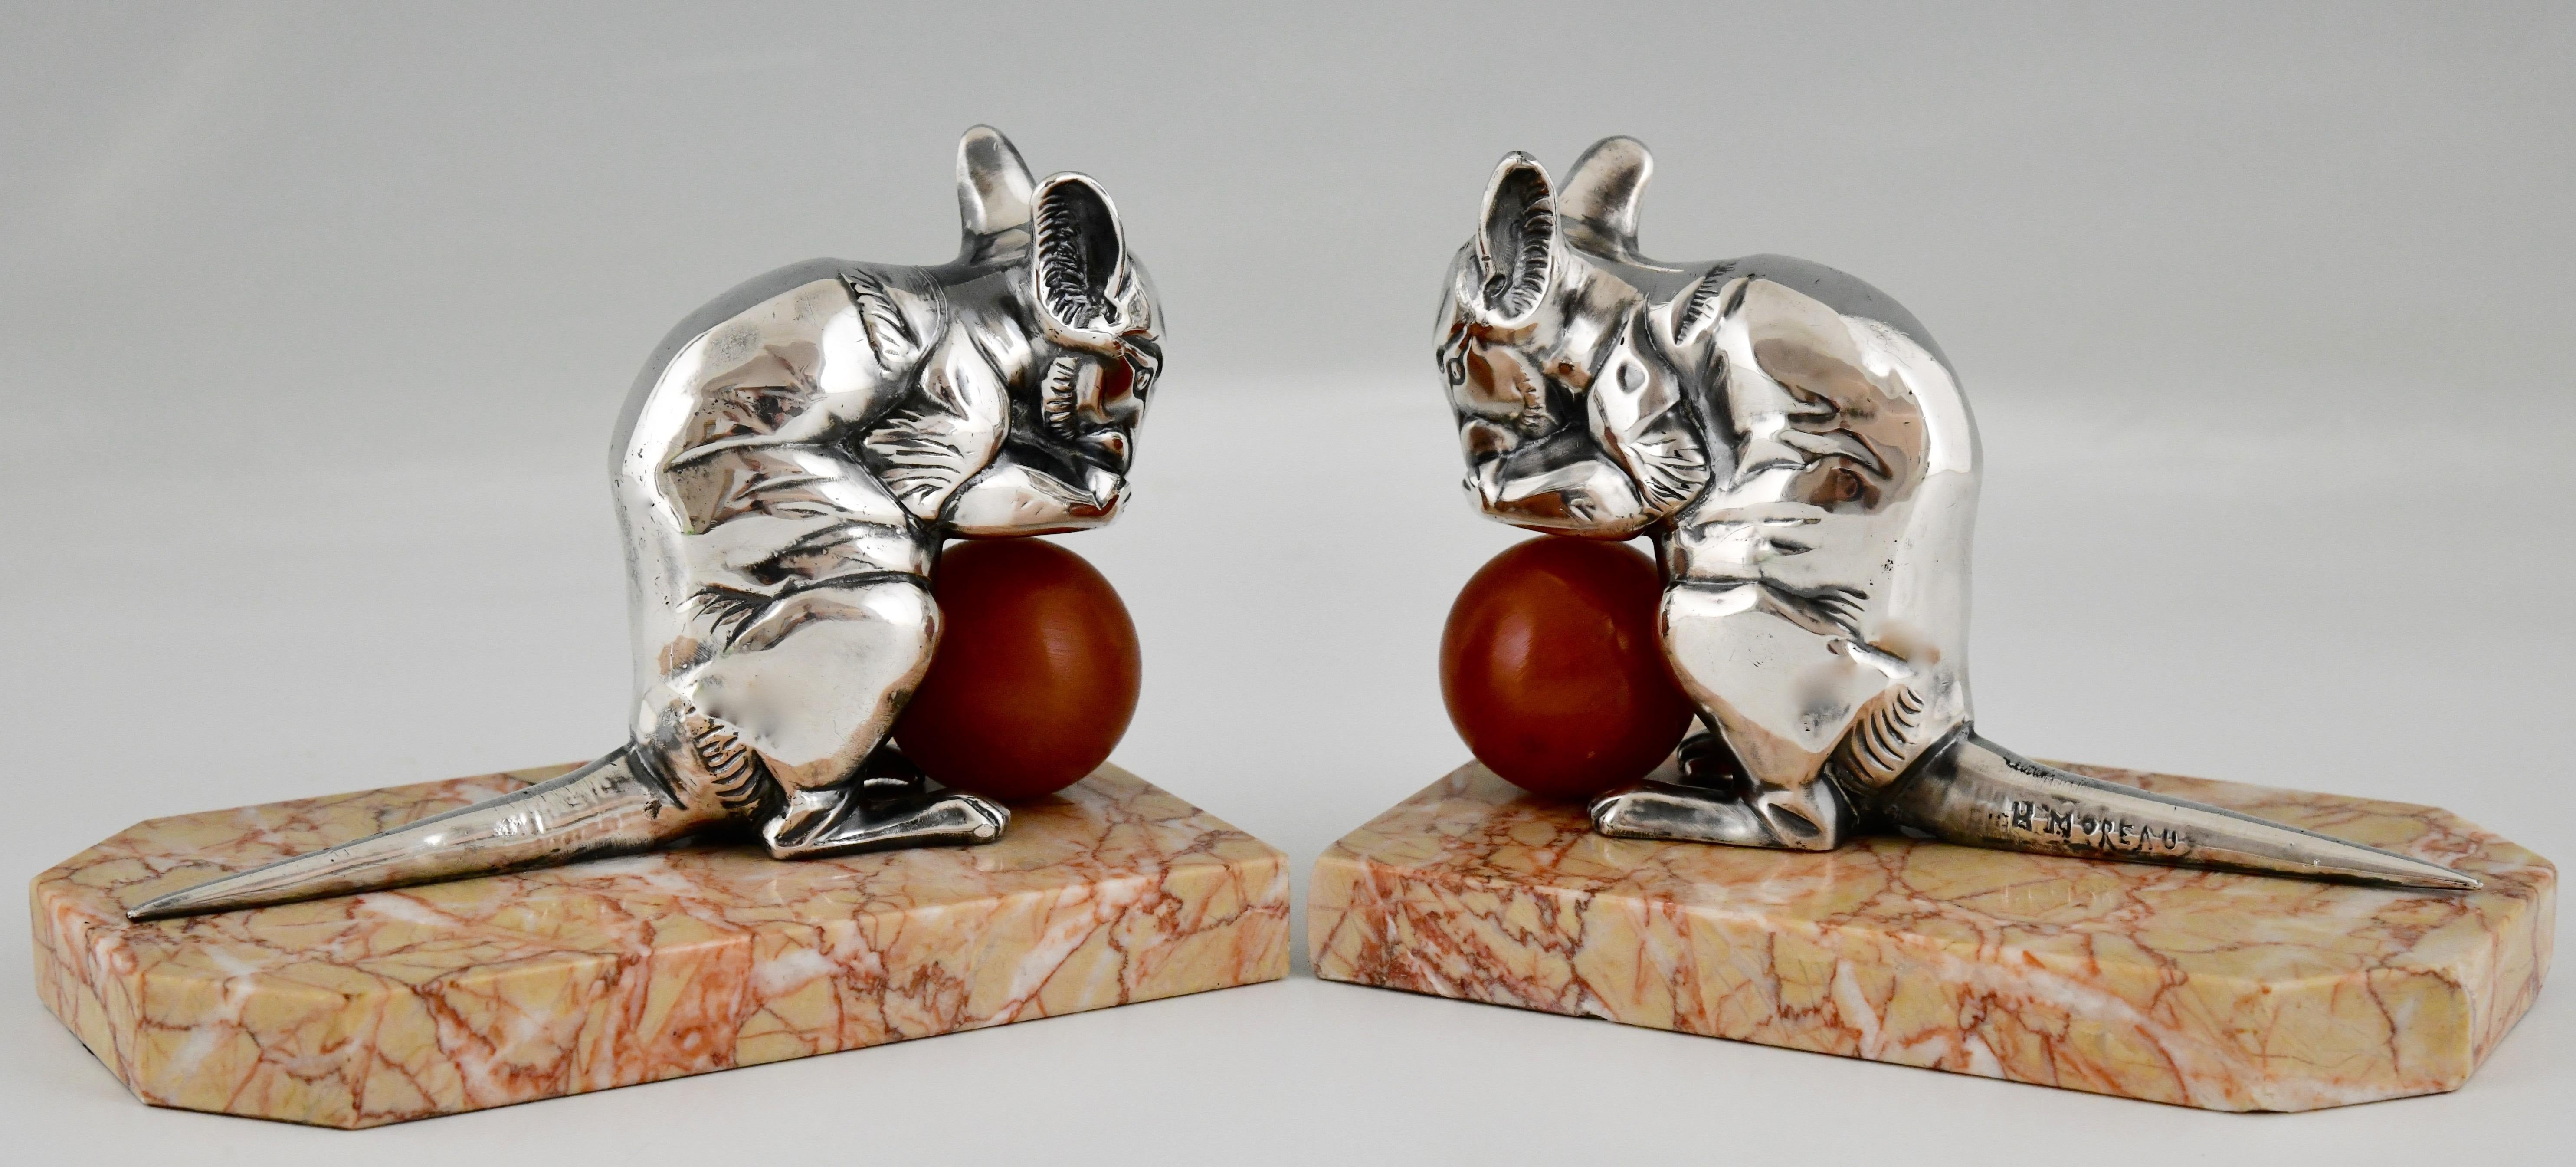 Art Deco mouse bookends signed by Hippolyte Moreau. 
Silvered metal mice holding a bakelite ball and mounted on marble bases.
France 1930.